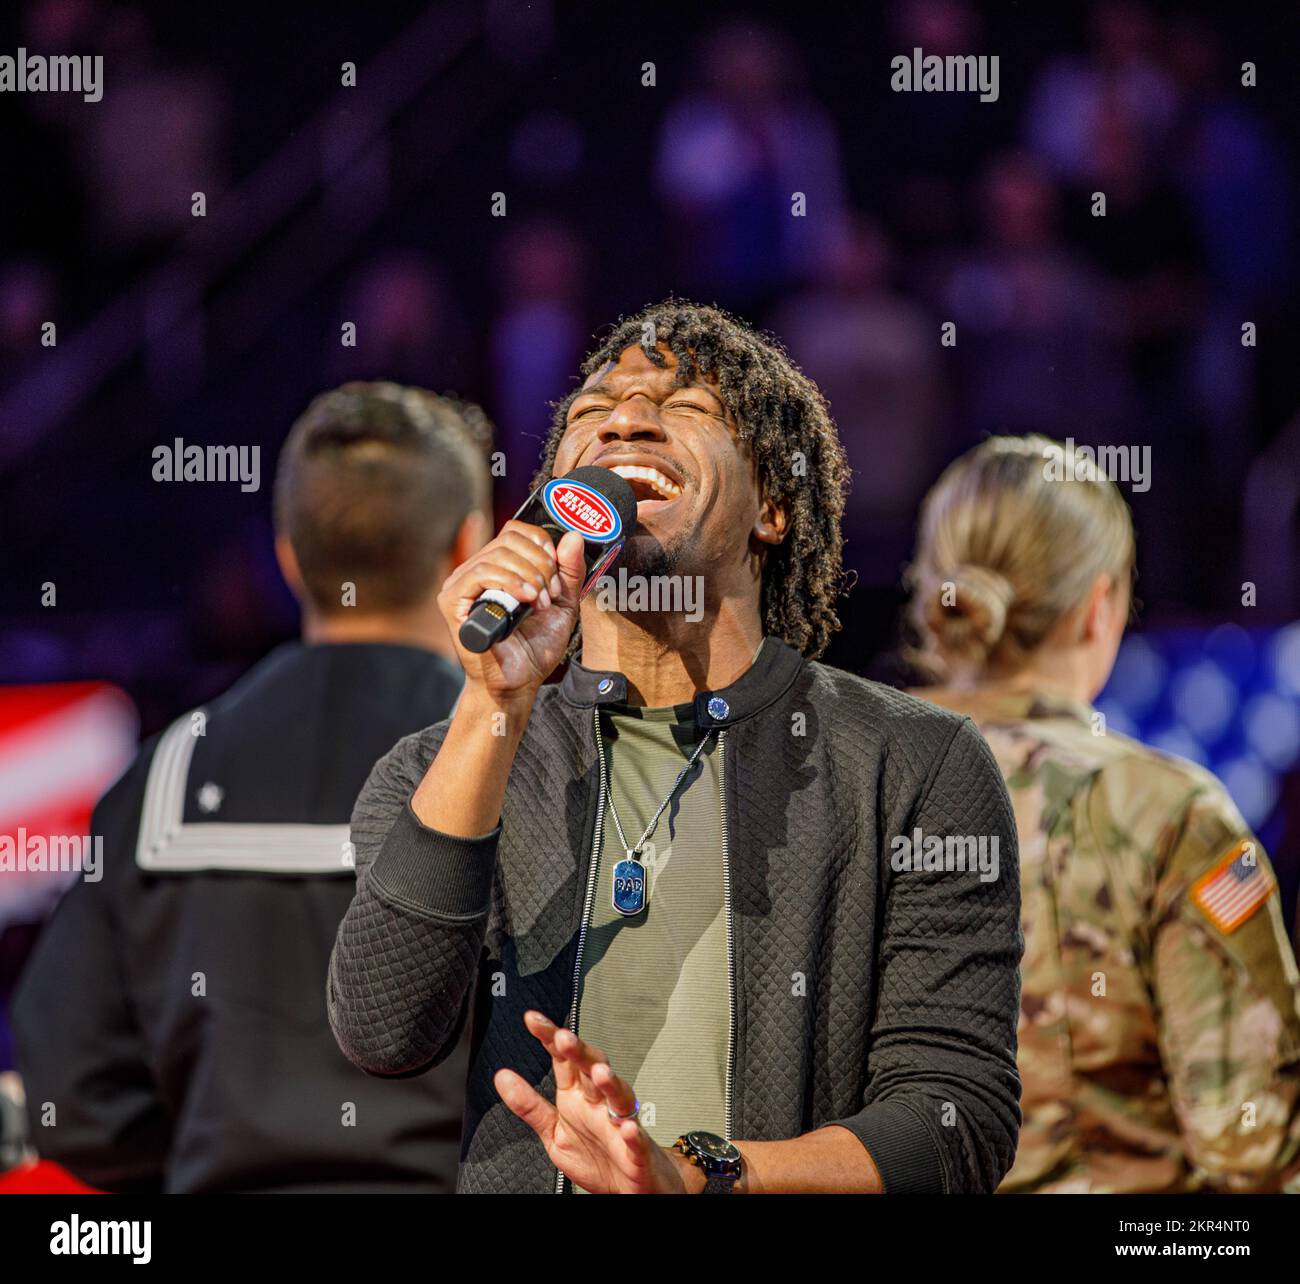 DETROIT, Mich. - Le’Bron Brinkley performs the National Anthem during the Detroit Pistons Military Appreciation Night event at Little Ceasars Arena on Nov. 7, 2022. (Army Reserve photo by Pfc. Joseph Honce, 220th Public Affairs Detachment).     The Detroit Pistons host their annual Military Appreciation Night in celebration of Veterans Day, in collaboration with members of the U.S. Armed Forces and their families on Monday, Nov. 7. This game was themed Hoops for Troops, a program that is a year-round initiative led by the NBA, its teams and players in collaboration with the Department of Defen Stock Photo